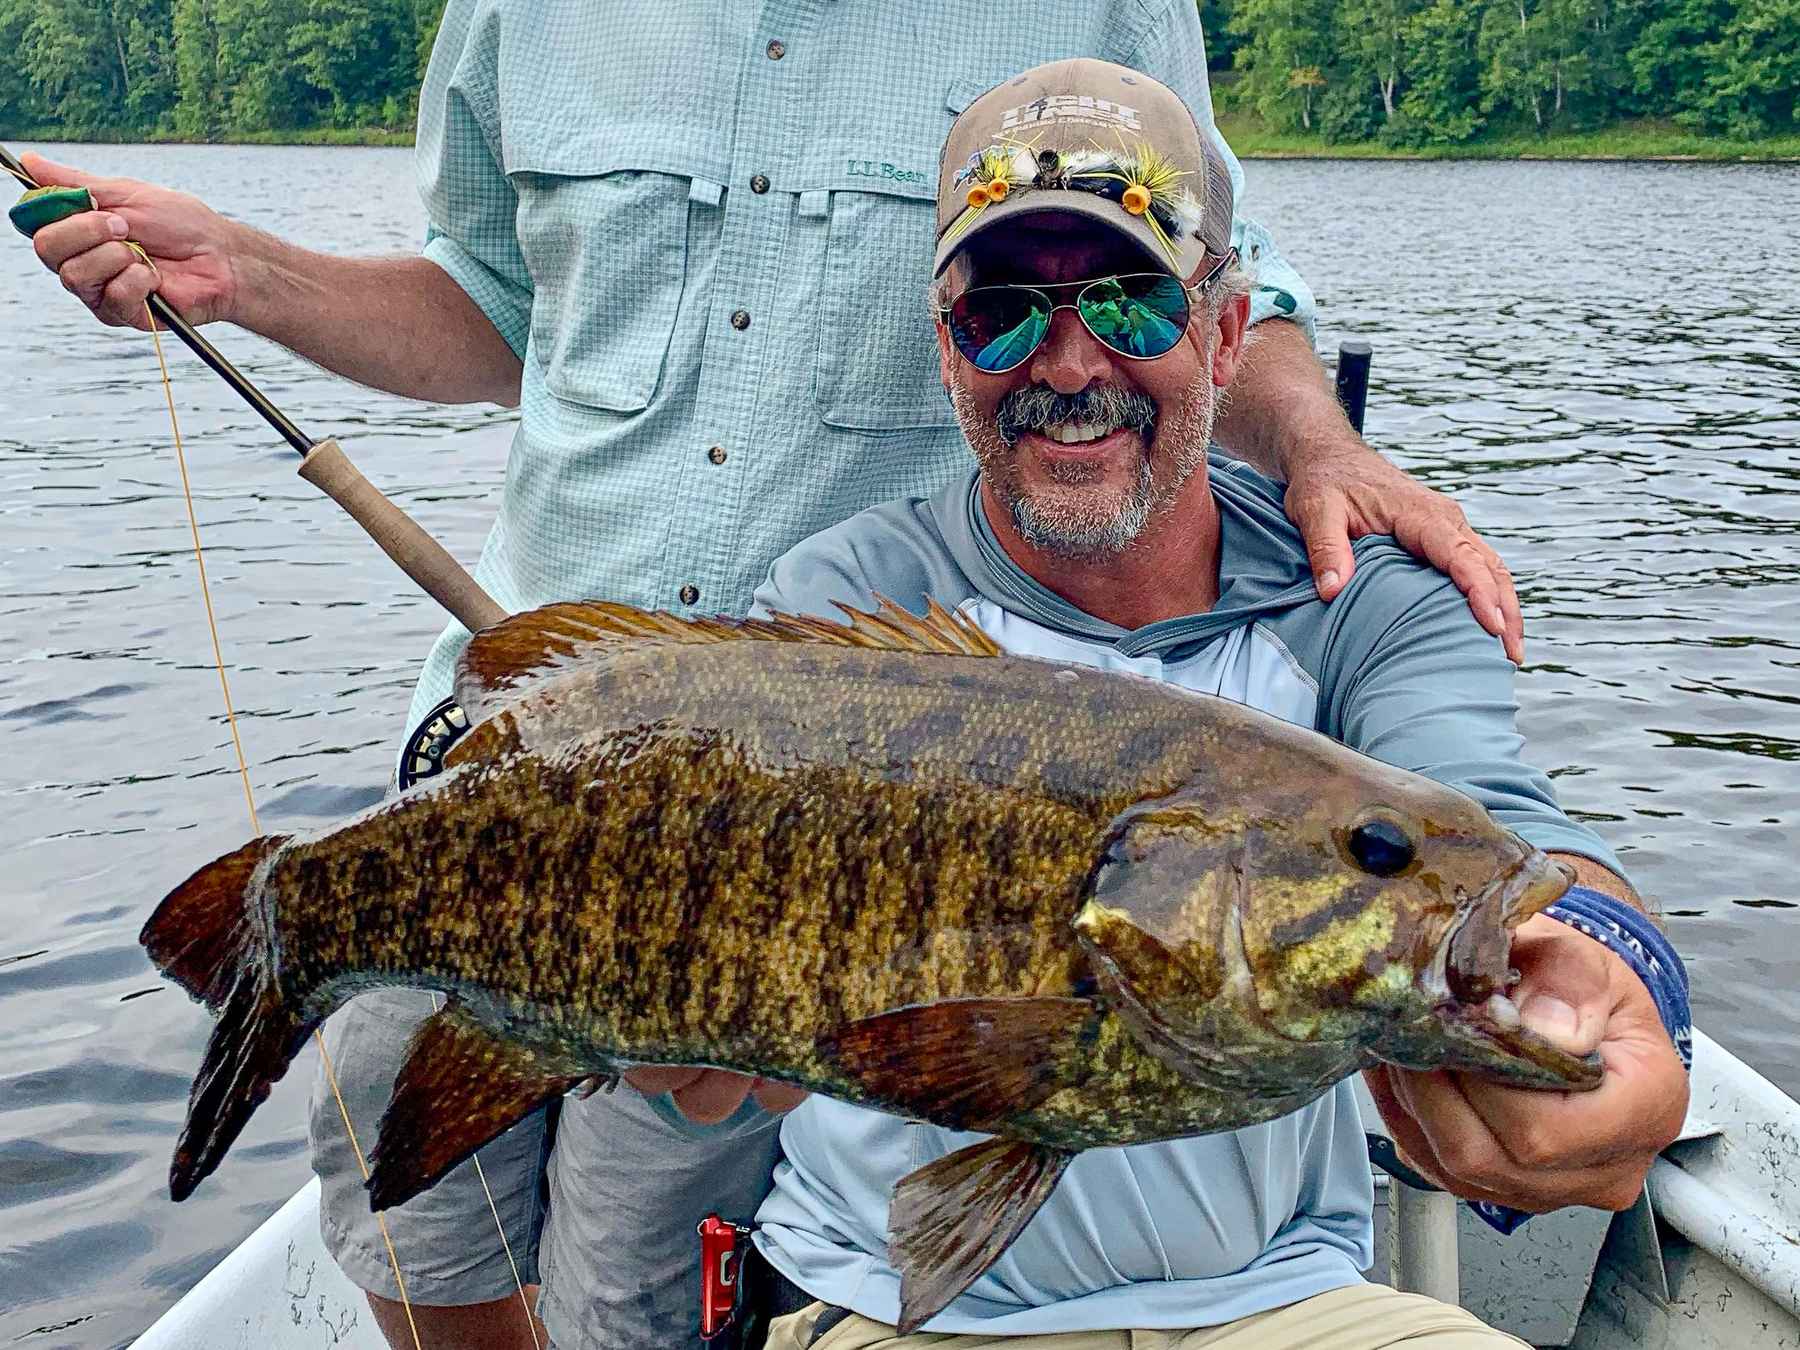 Late summer can offer explosive topwater smallmouth action